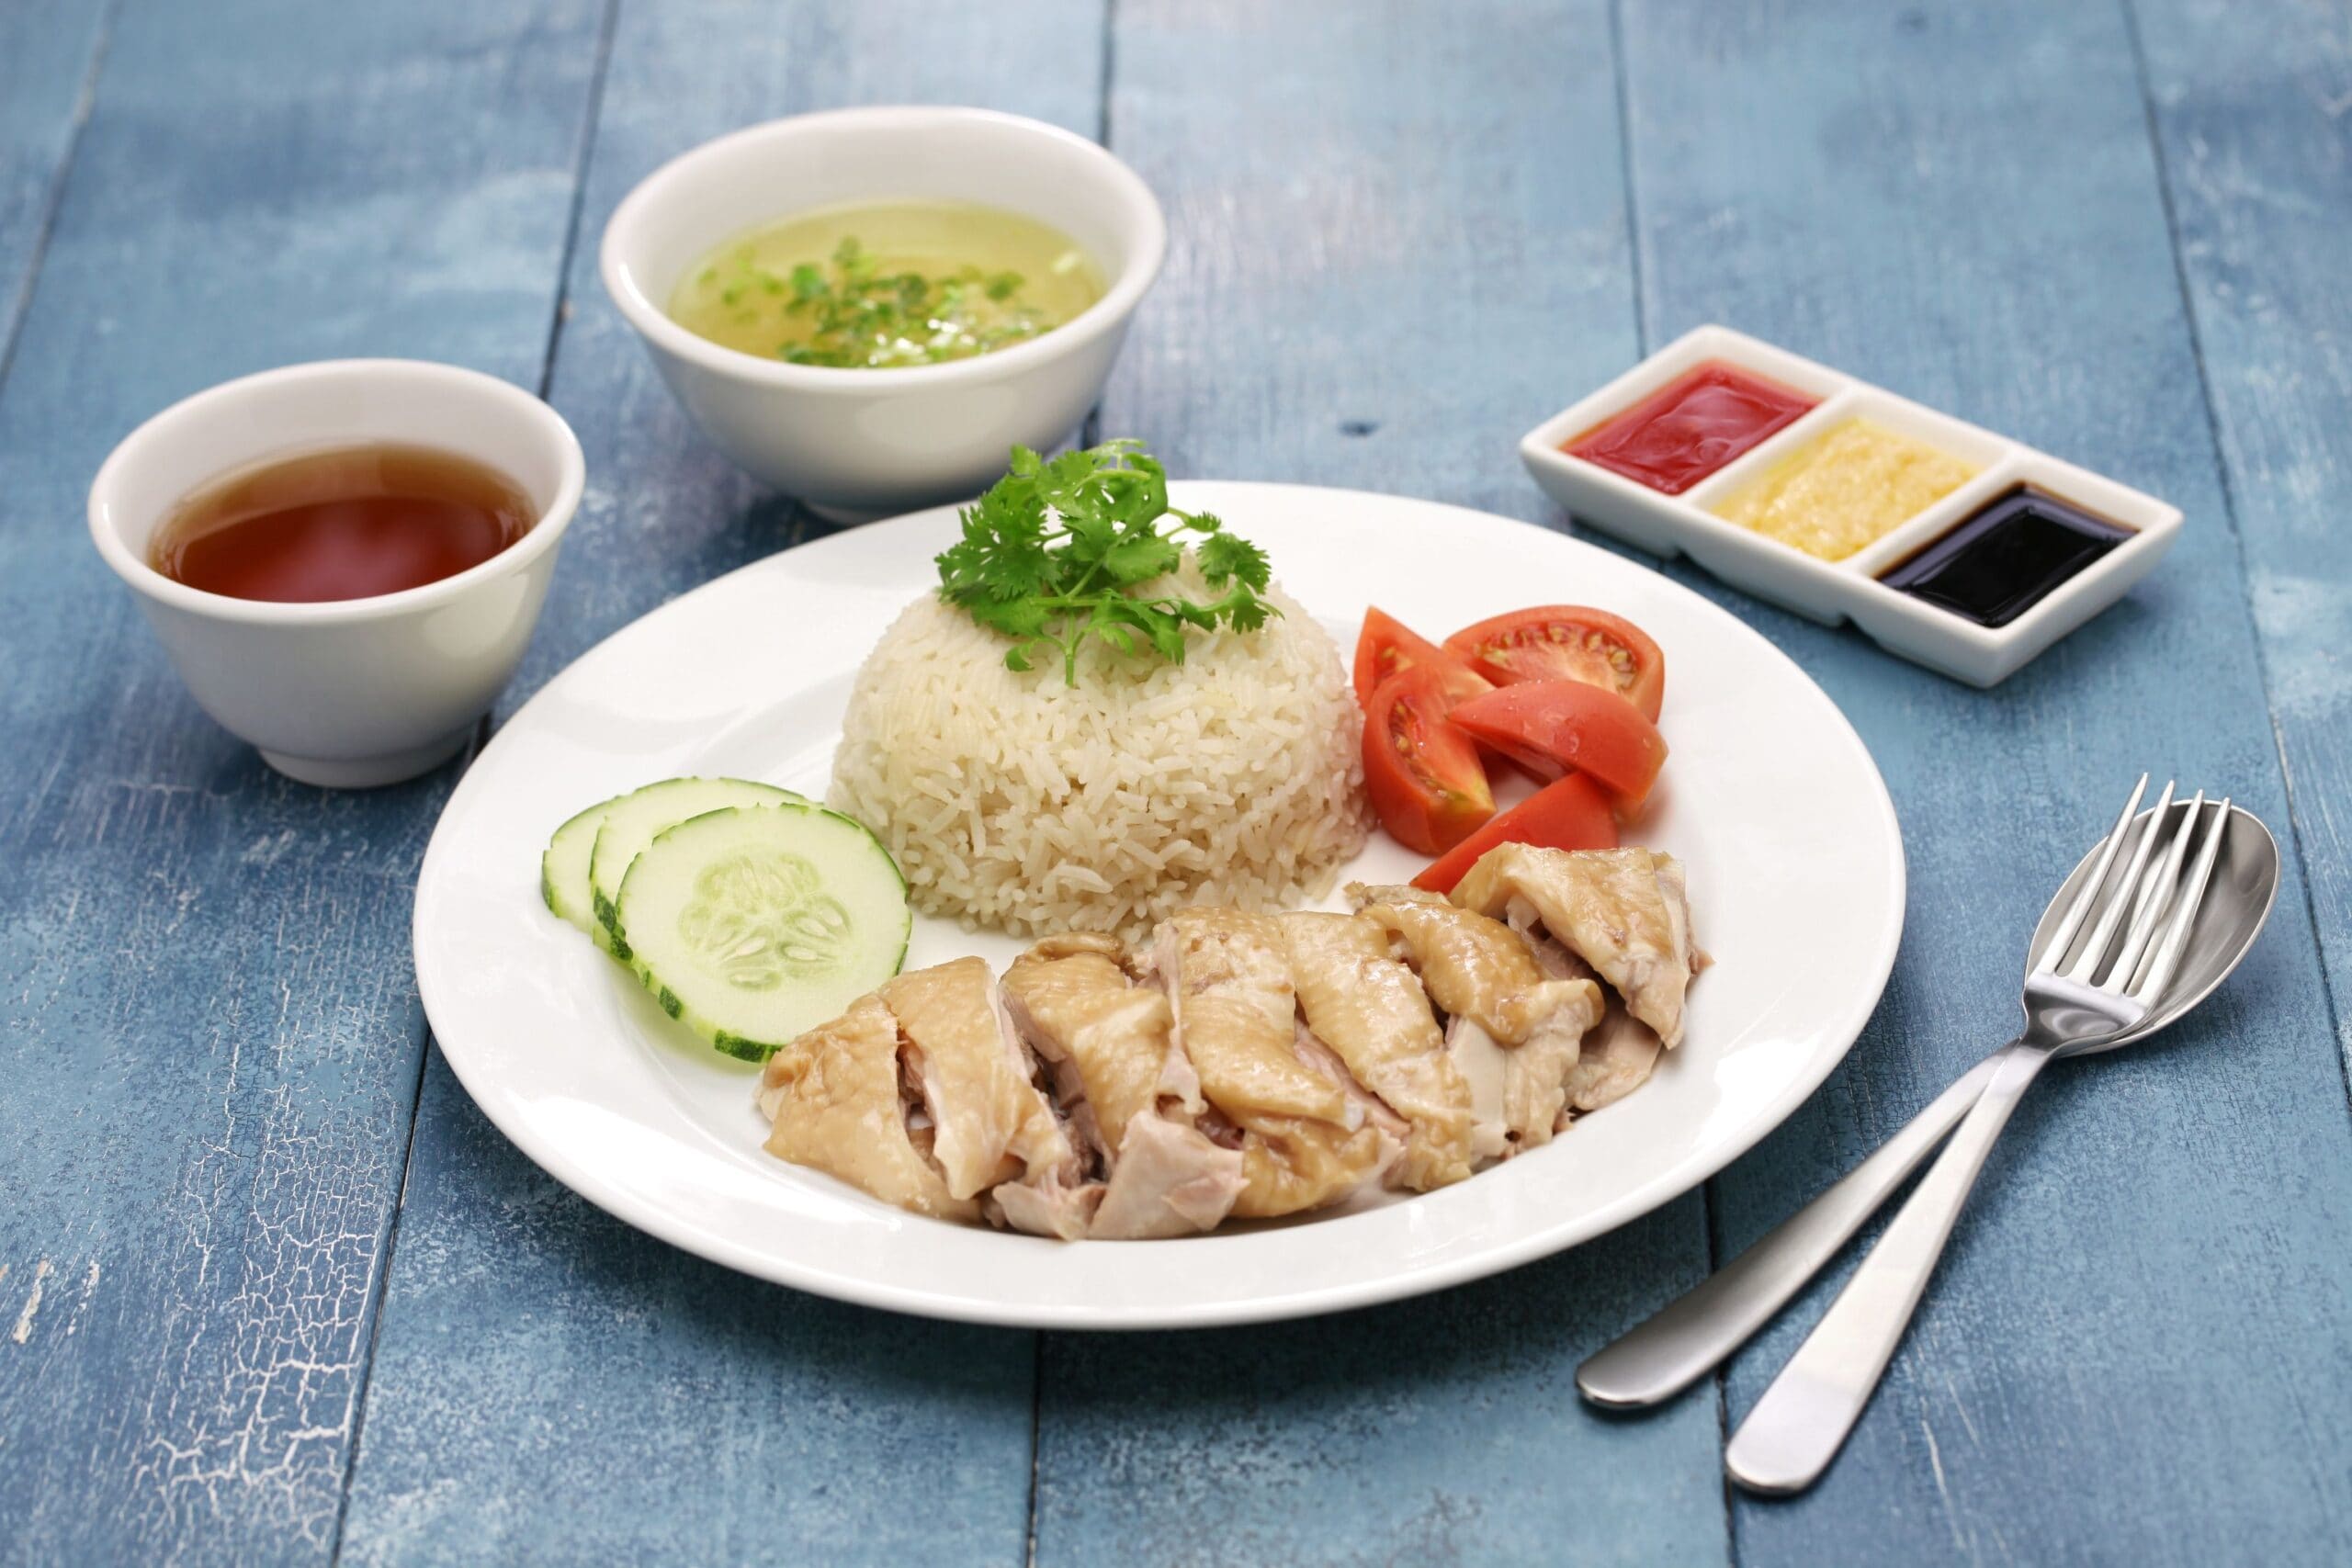 Name the most popular Singaporean chicken dish.